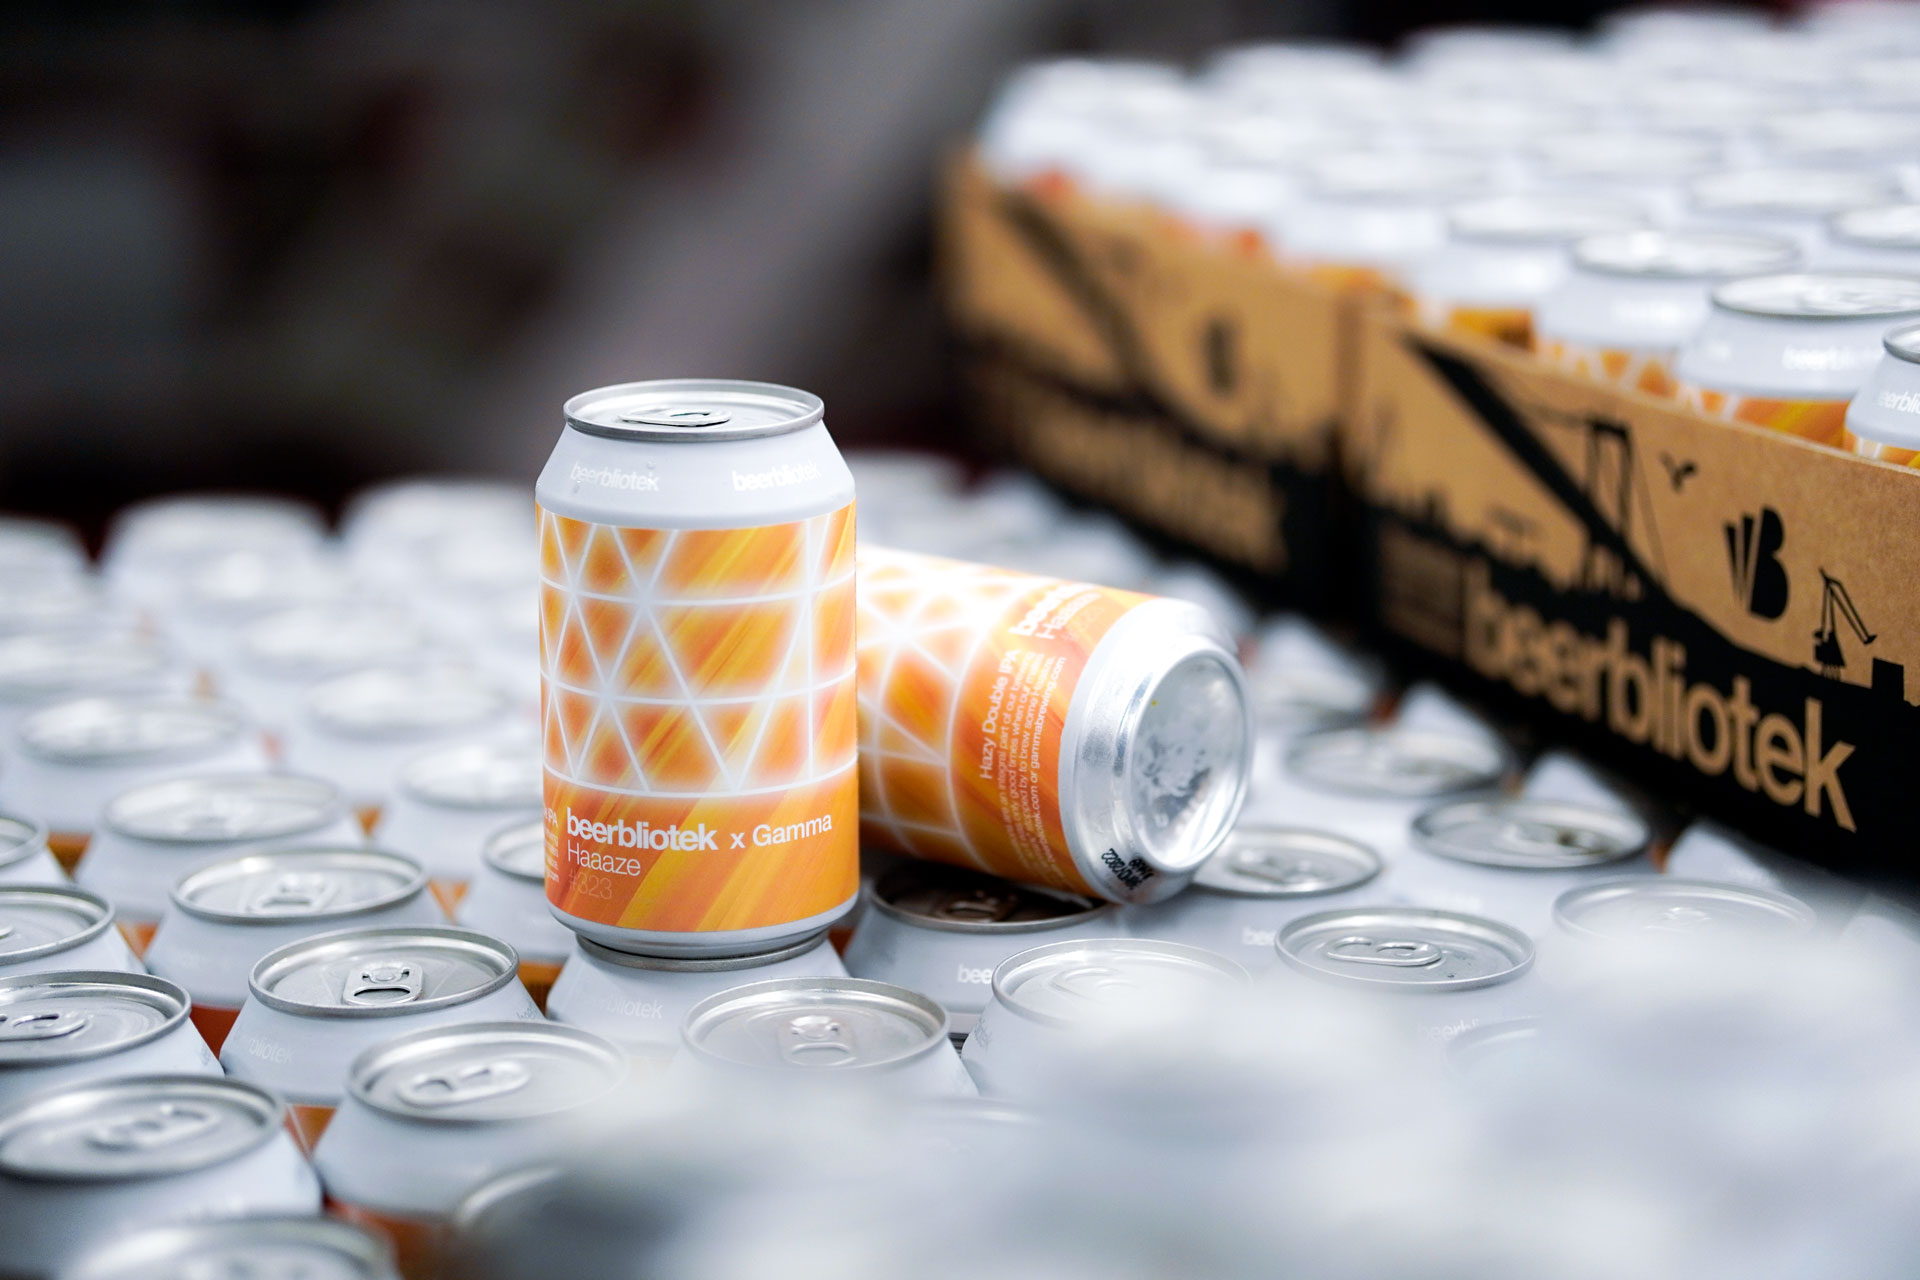 Two cans on packaging day of Haaaze, a Hazy Double IPA. This is a collaboration, brewed in Gothenburg, by Swedish Craft Brewery Beerbliotek, and Danish brewery, Gamma.